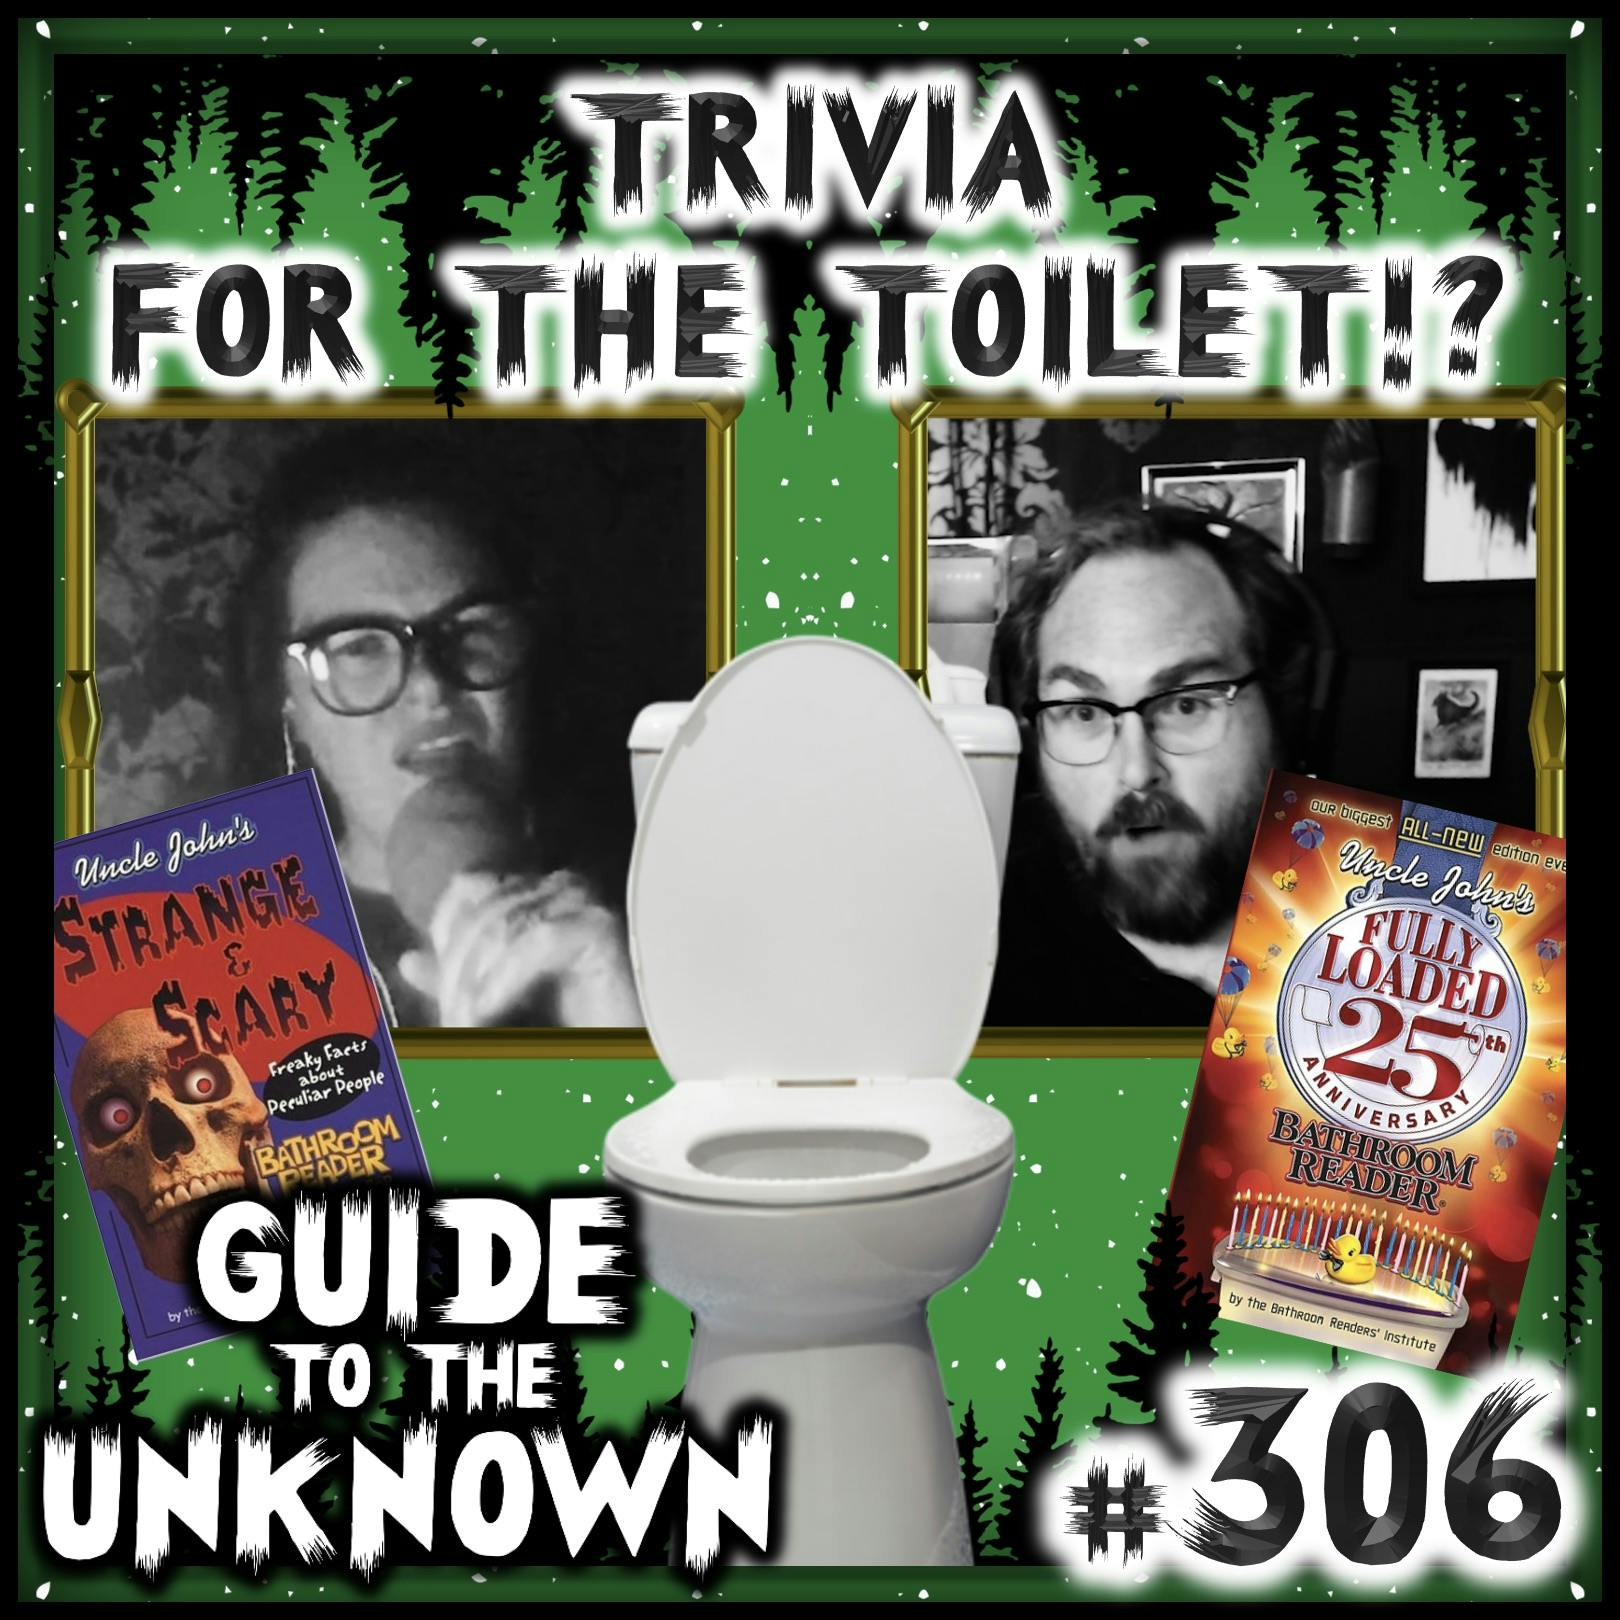 306: Trivia for the Toilet!?